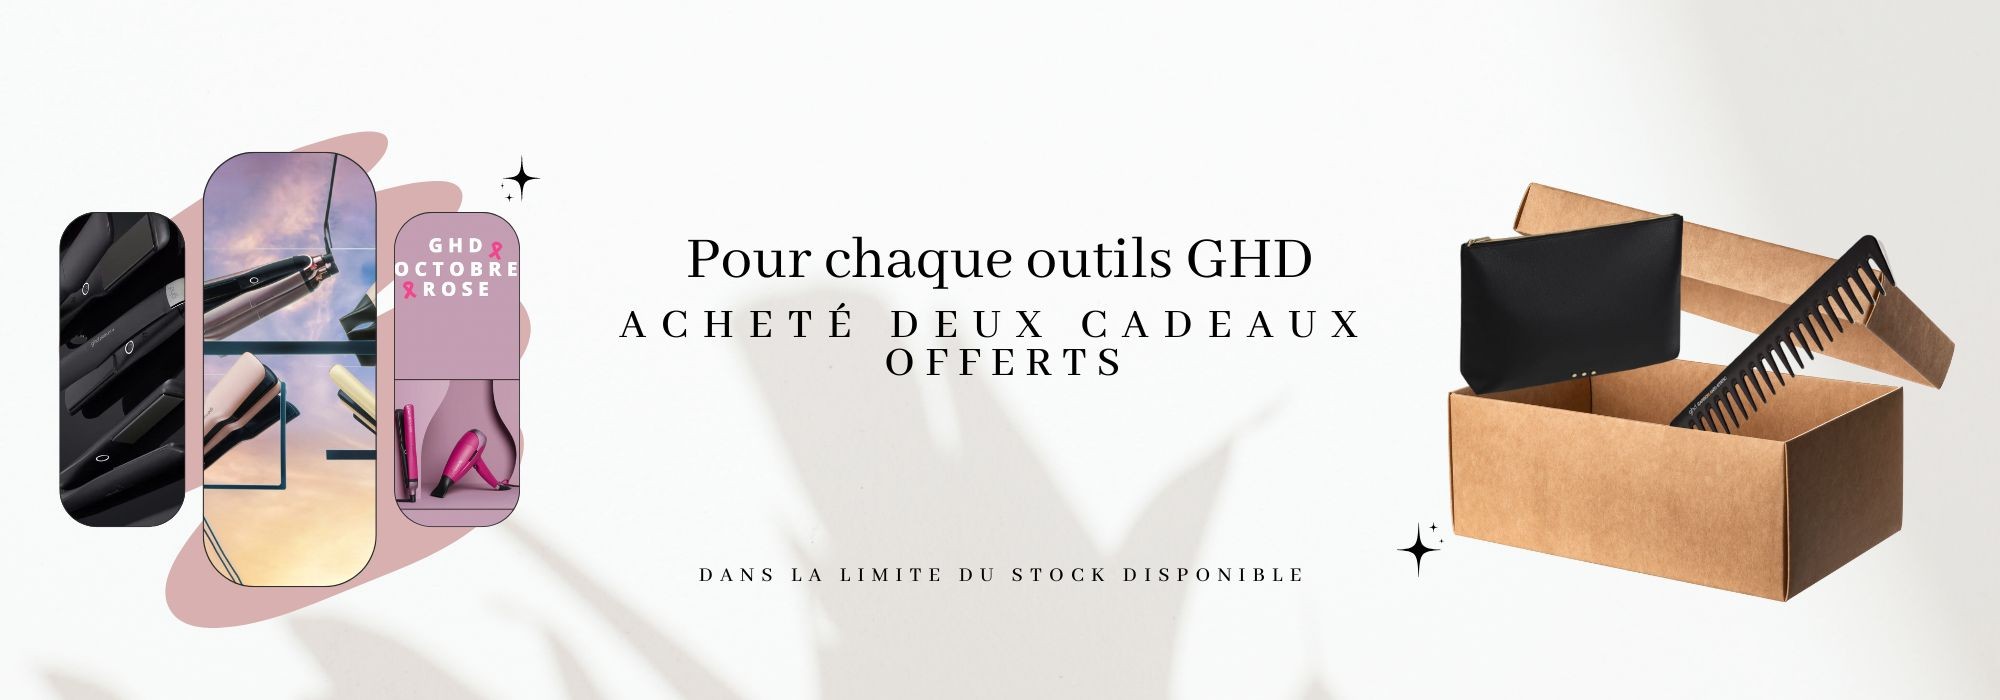 Les outils GHD